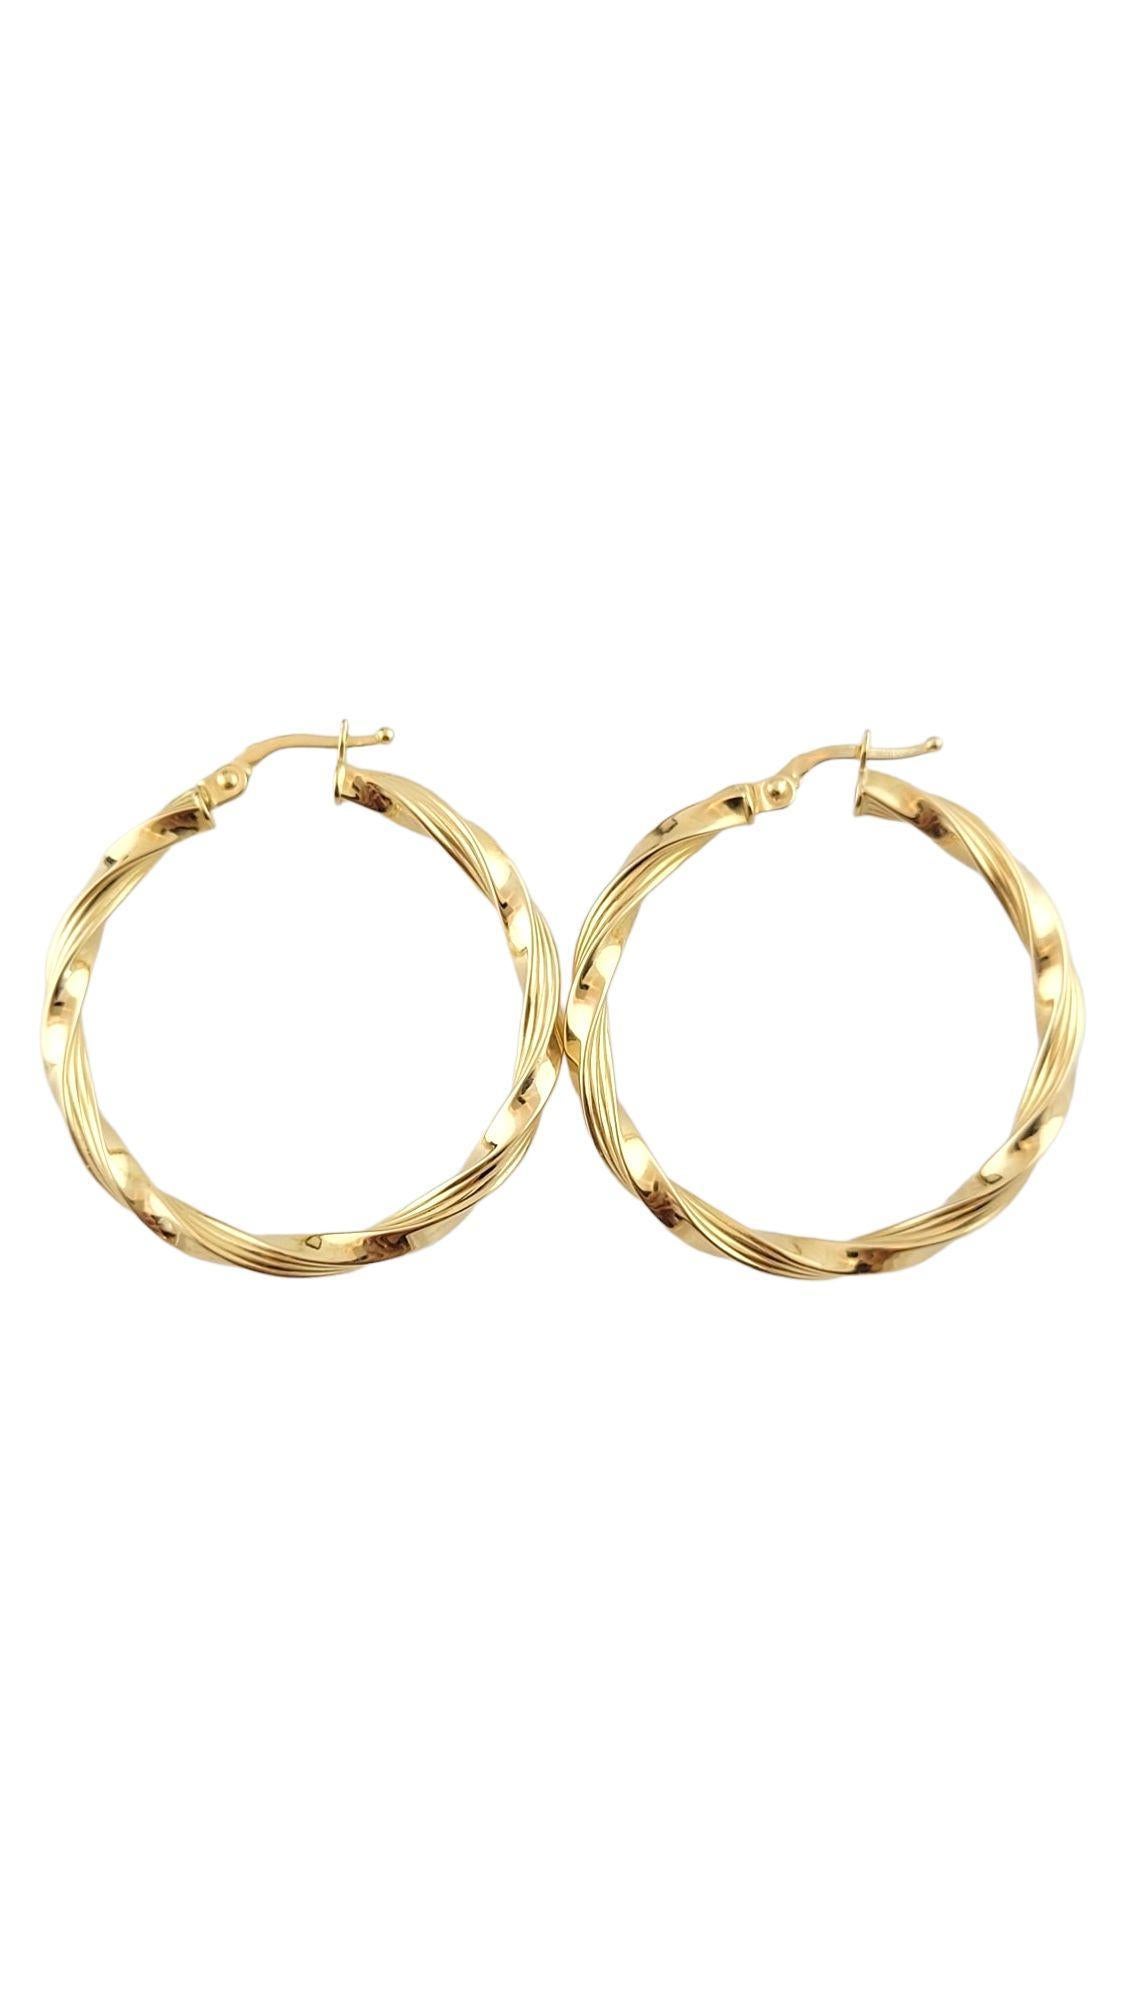 Vintage 14K Yellow Gold Twisted Hoops

Gorgeous set of 14K yellow gold hoops in a twisted design!

Size: 36.4mm X 33.3mm X 13.1mm

Weight: 3.00 g/ 1.9 dwt

Hallmark: 585

Very good condition, professionally polished.

Will come packaged in a gift